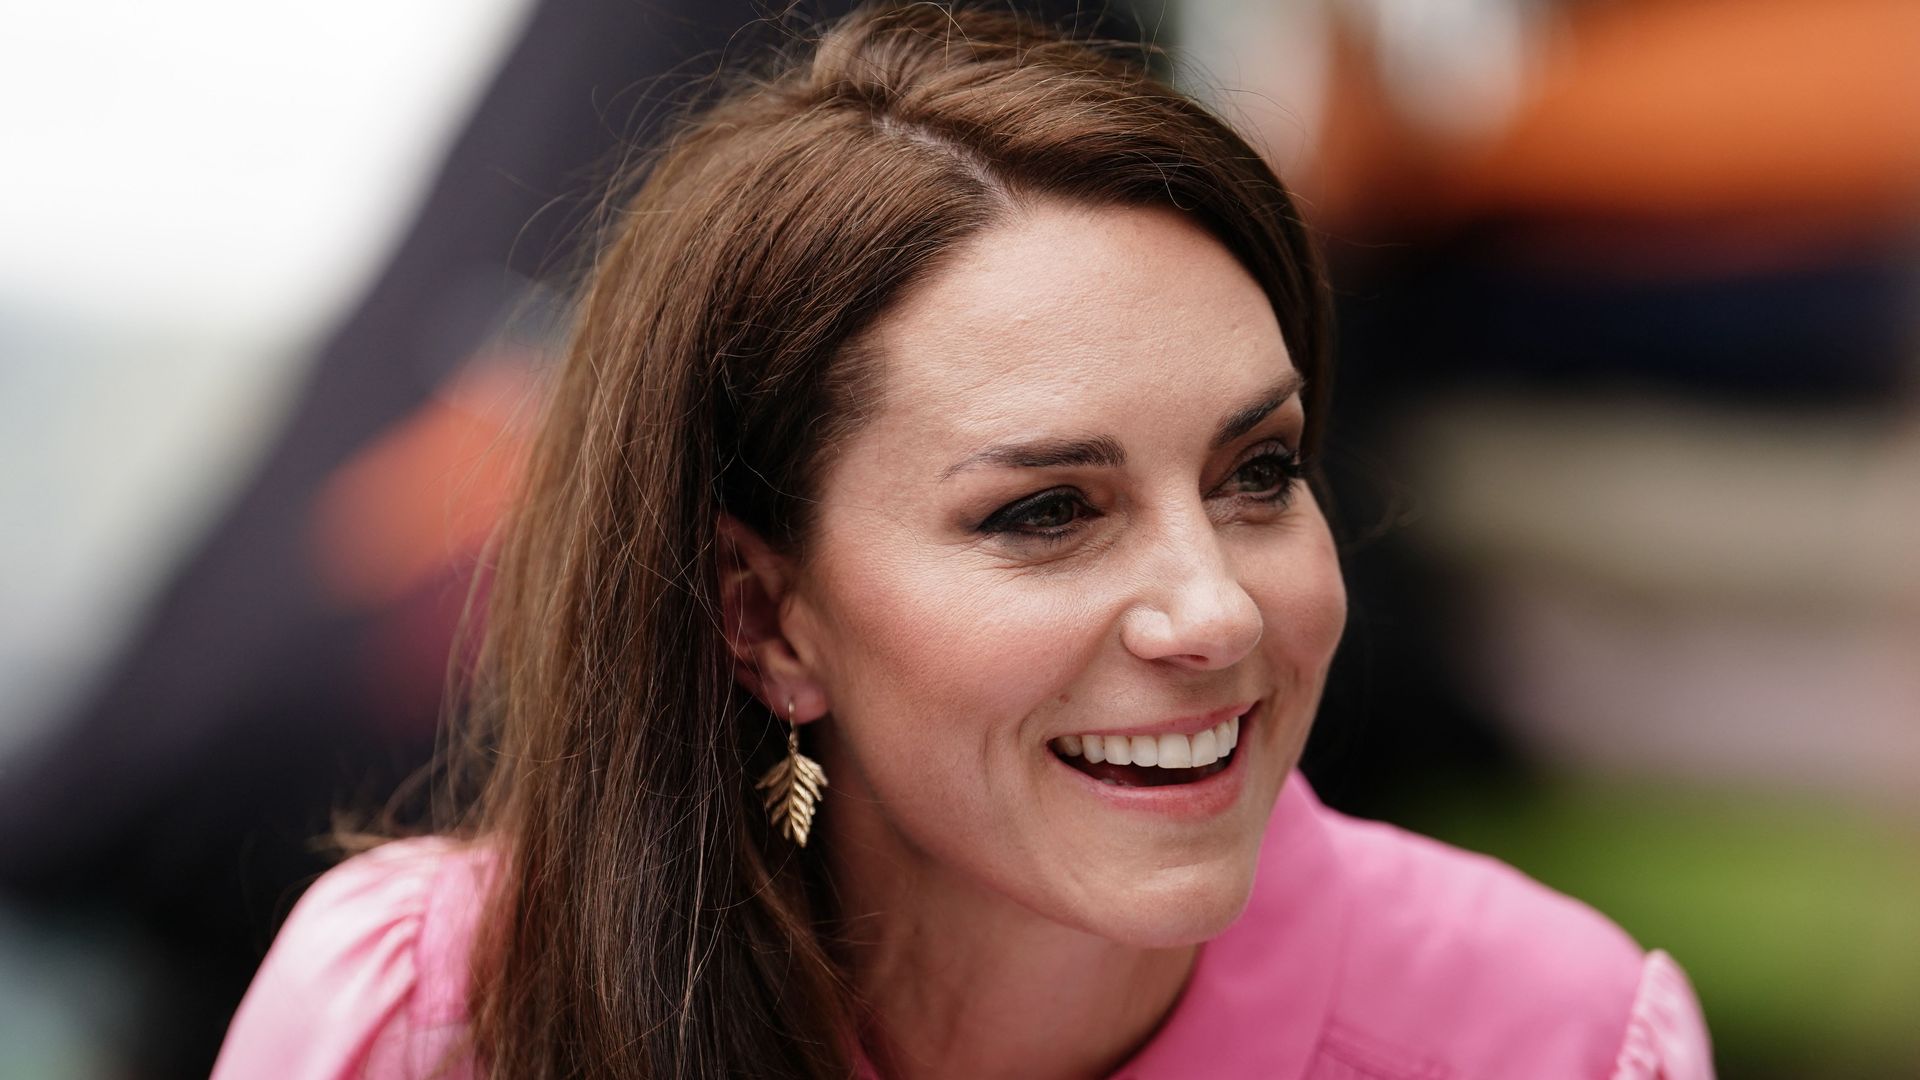 Kate Middleton wearing a pink dress and smiling at Chelsea Flower Show